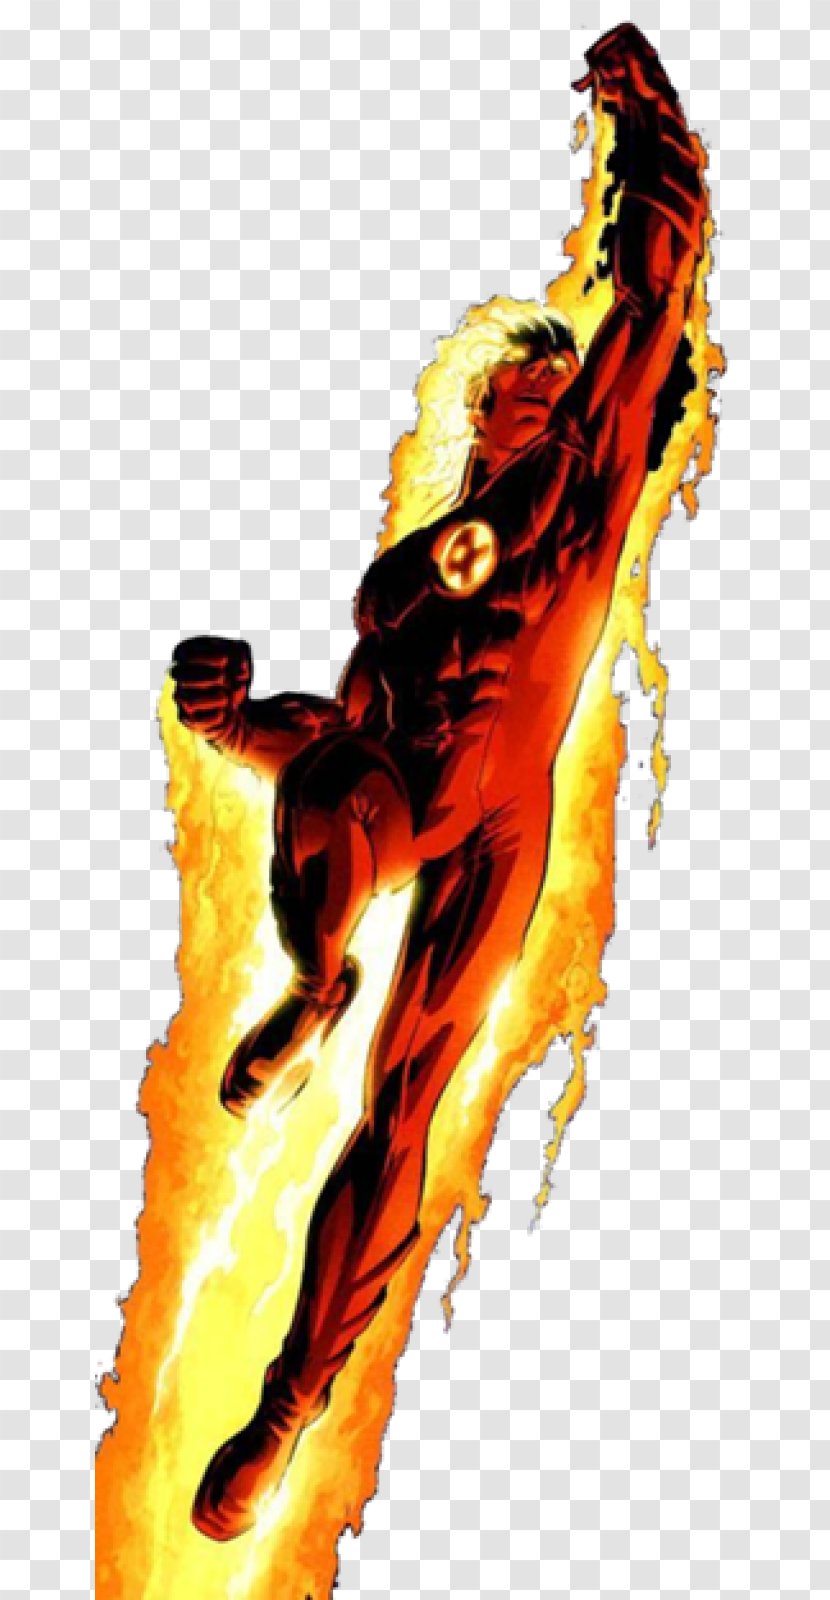 Human Torch Invisible Woman Marvel: Avengers Alliance Mister Fantastic Transparent PNG